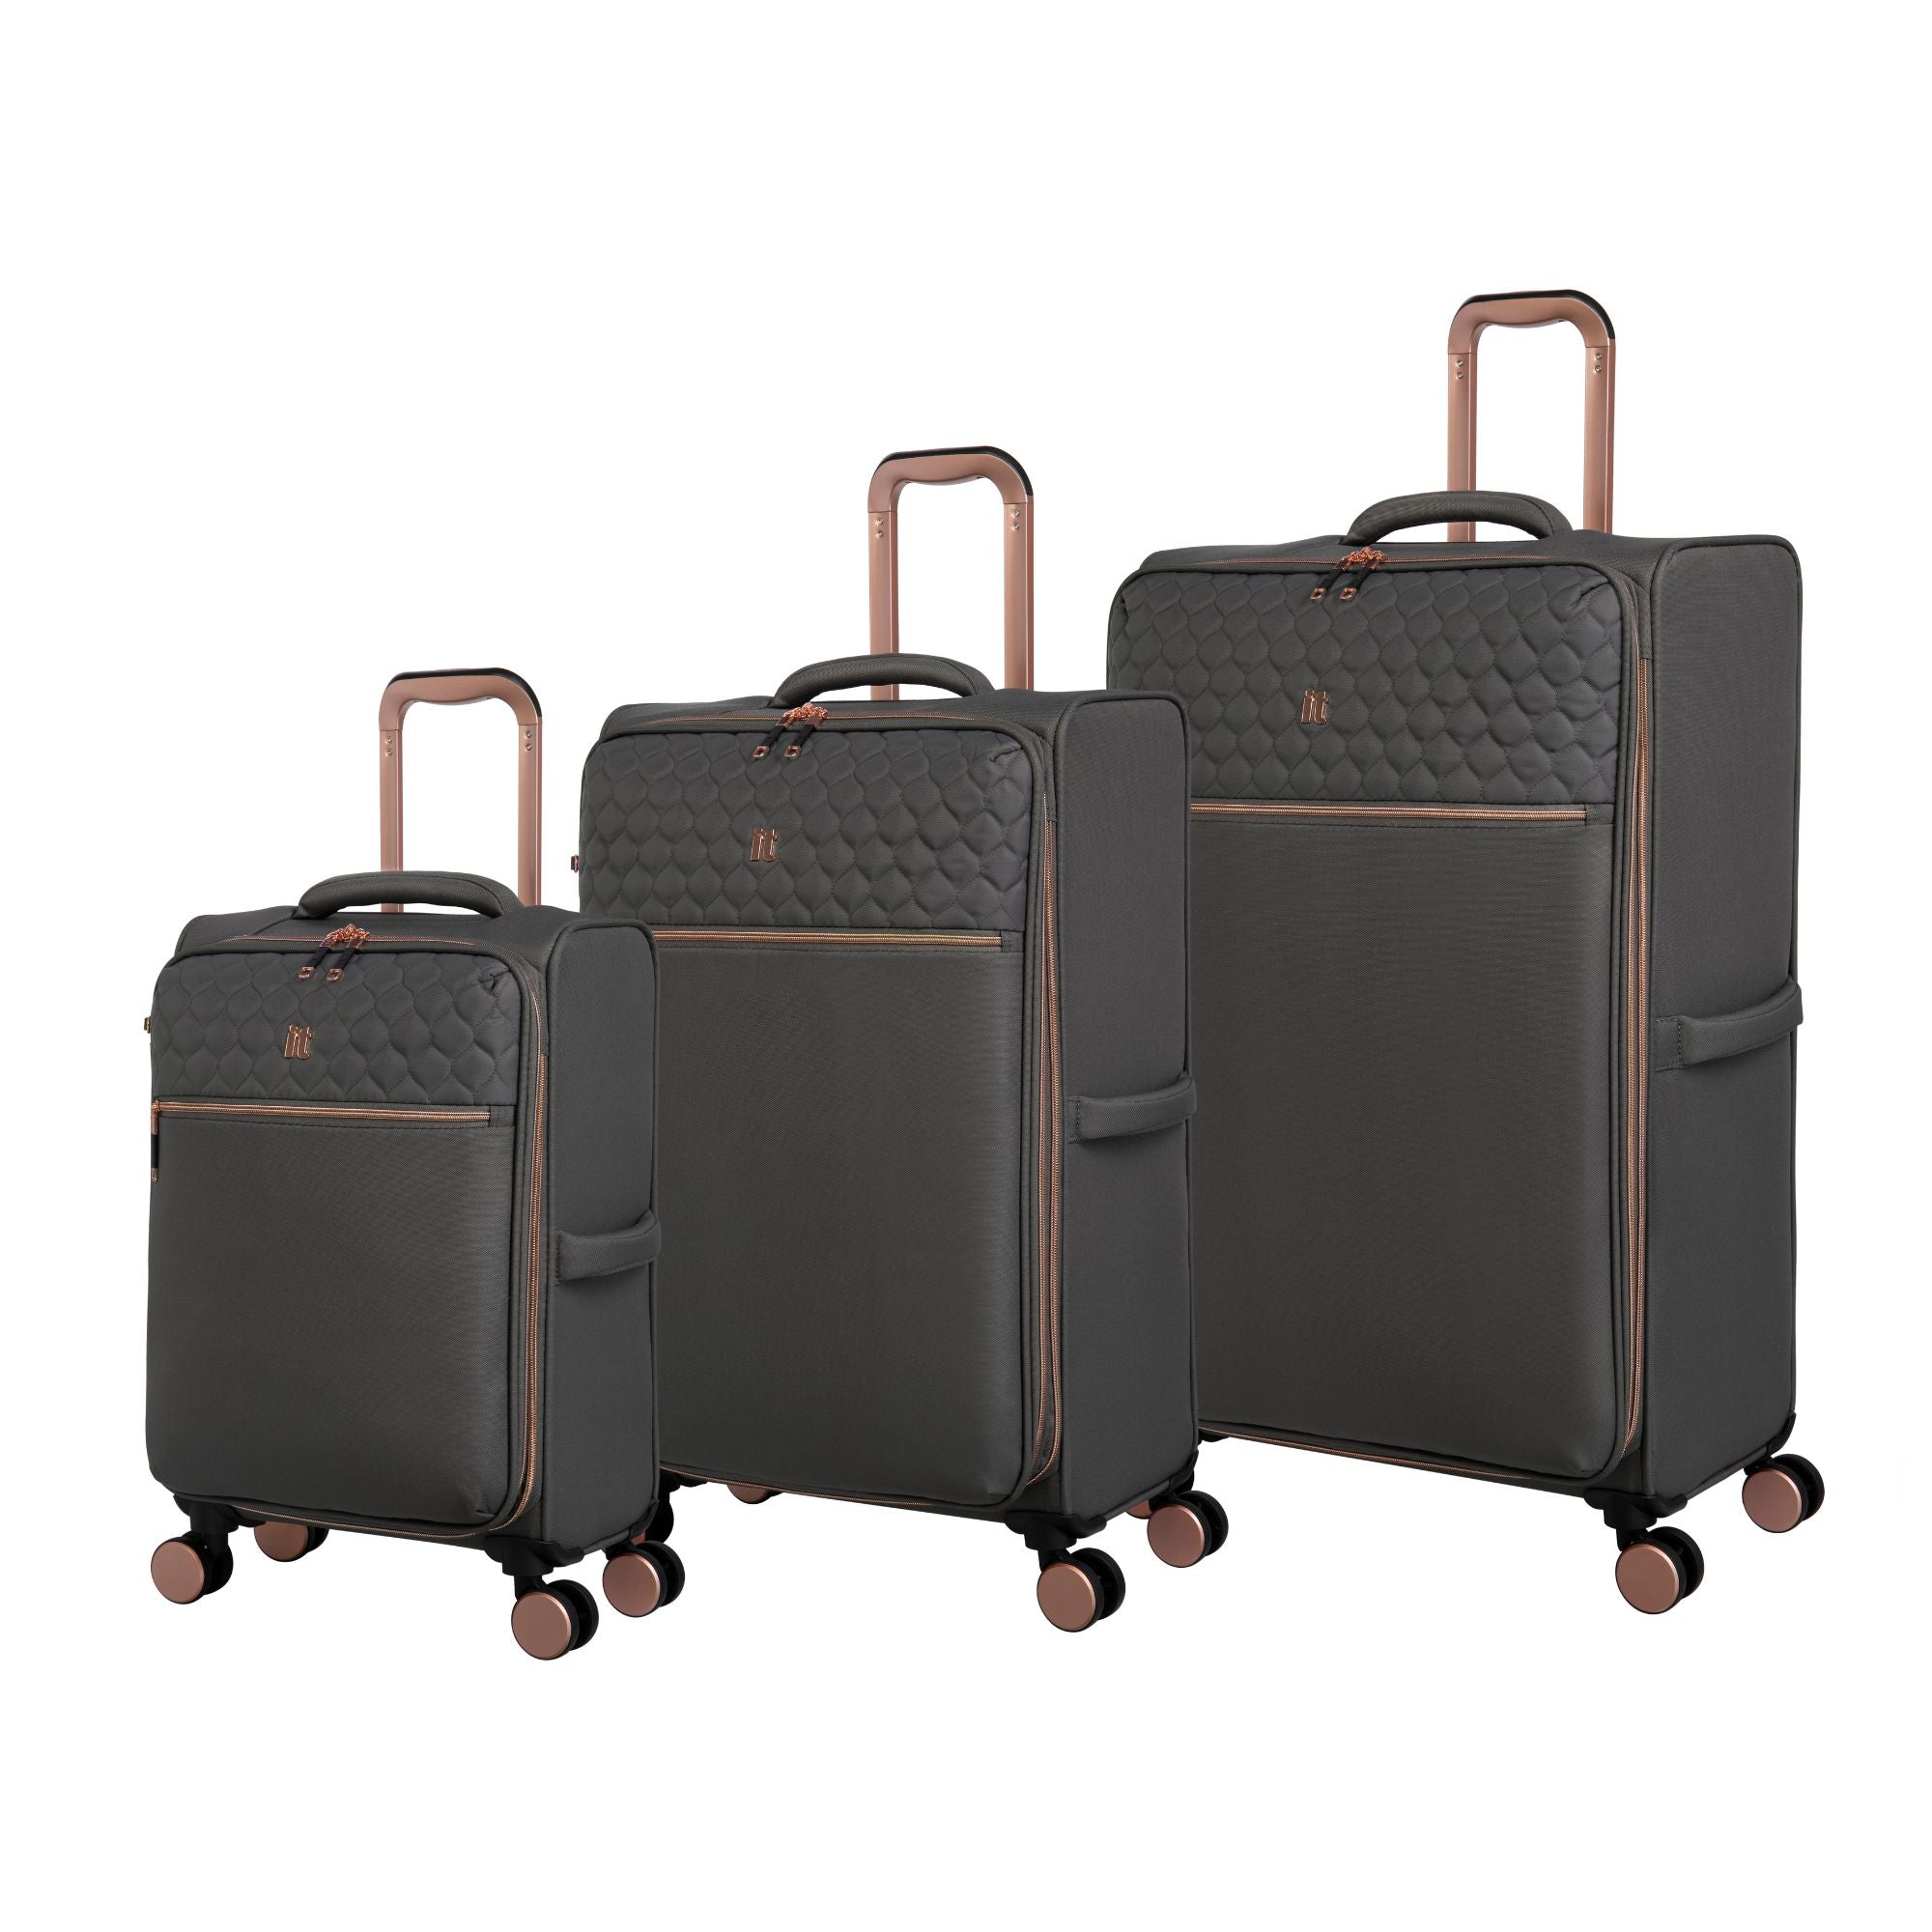 IT Luggage Suitcase Divinity - Grey and Rose Gold - 22 Inches  | TJ Hughes